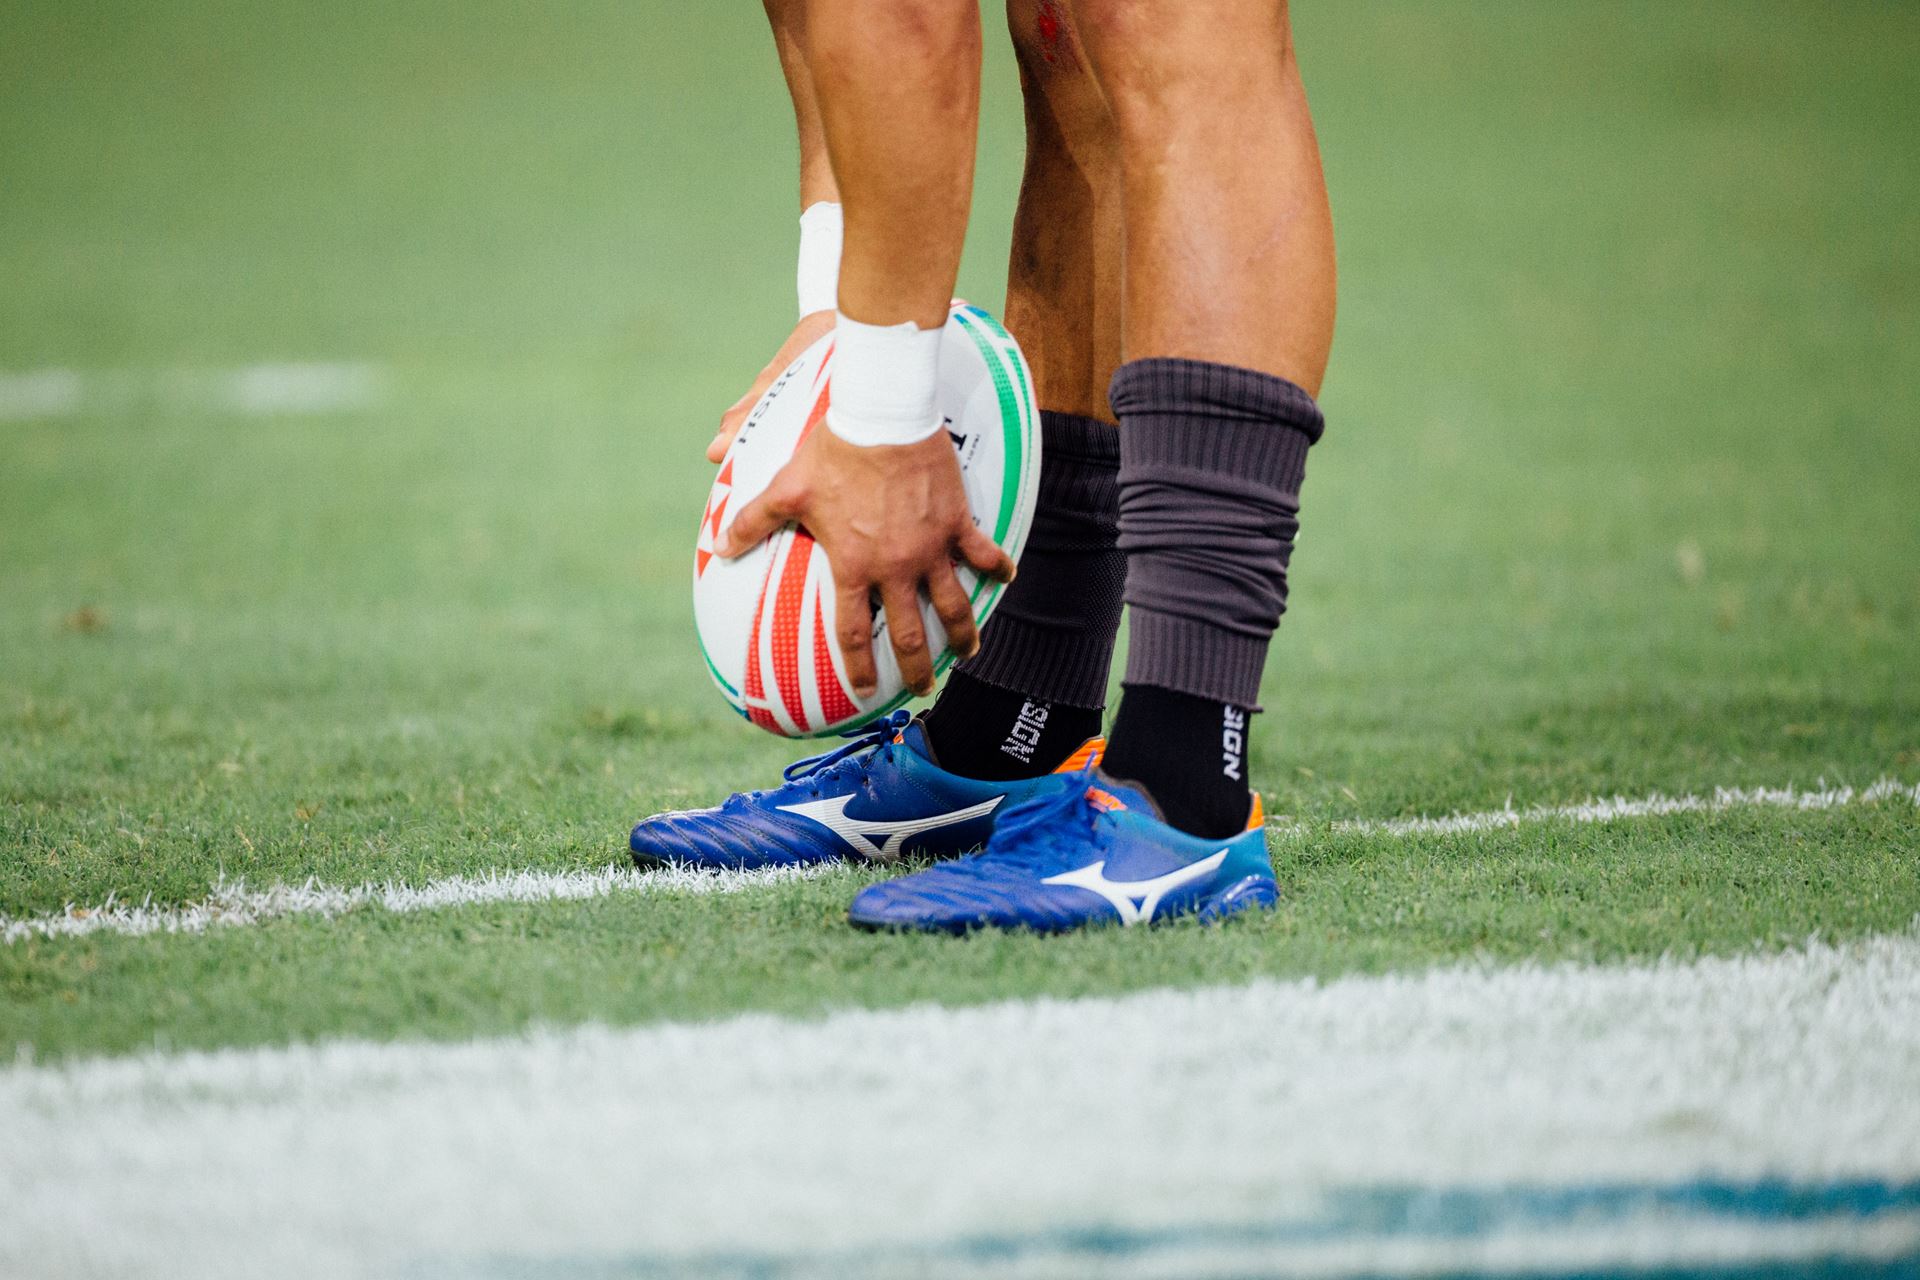 An image of a rugby player from the knees down placing a rugby ball on the ground